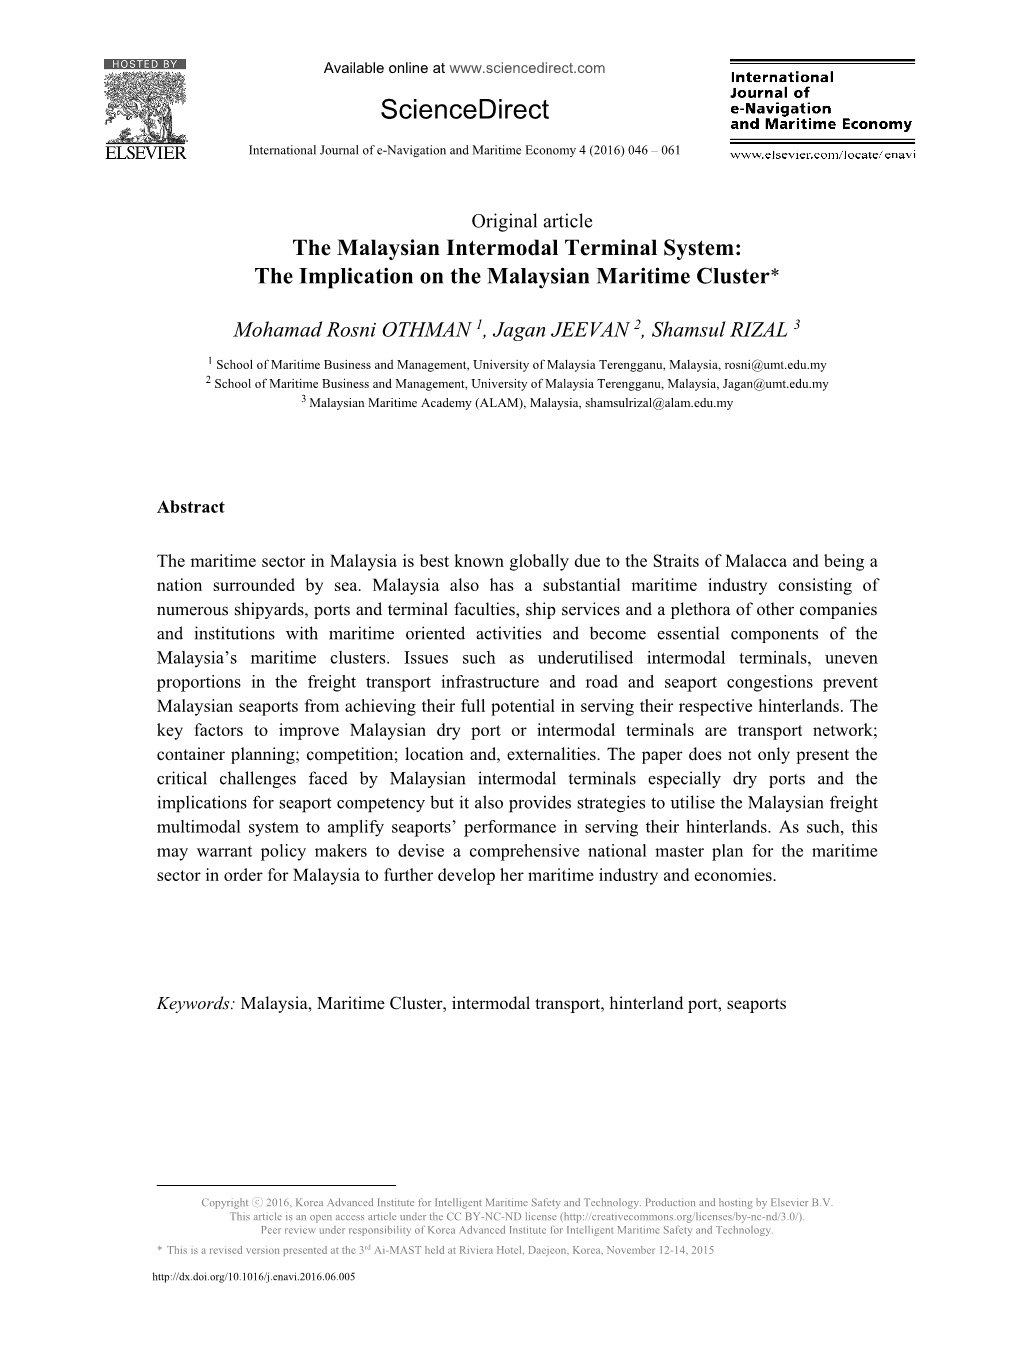 The Malaysian Intermodal Terminal System: the Implication on the Malaysian Maritime Cluster*